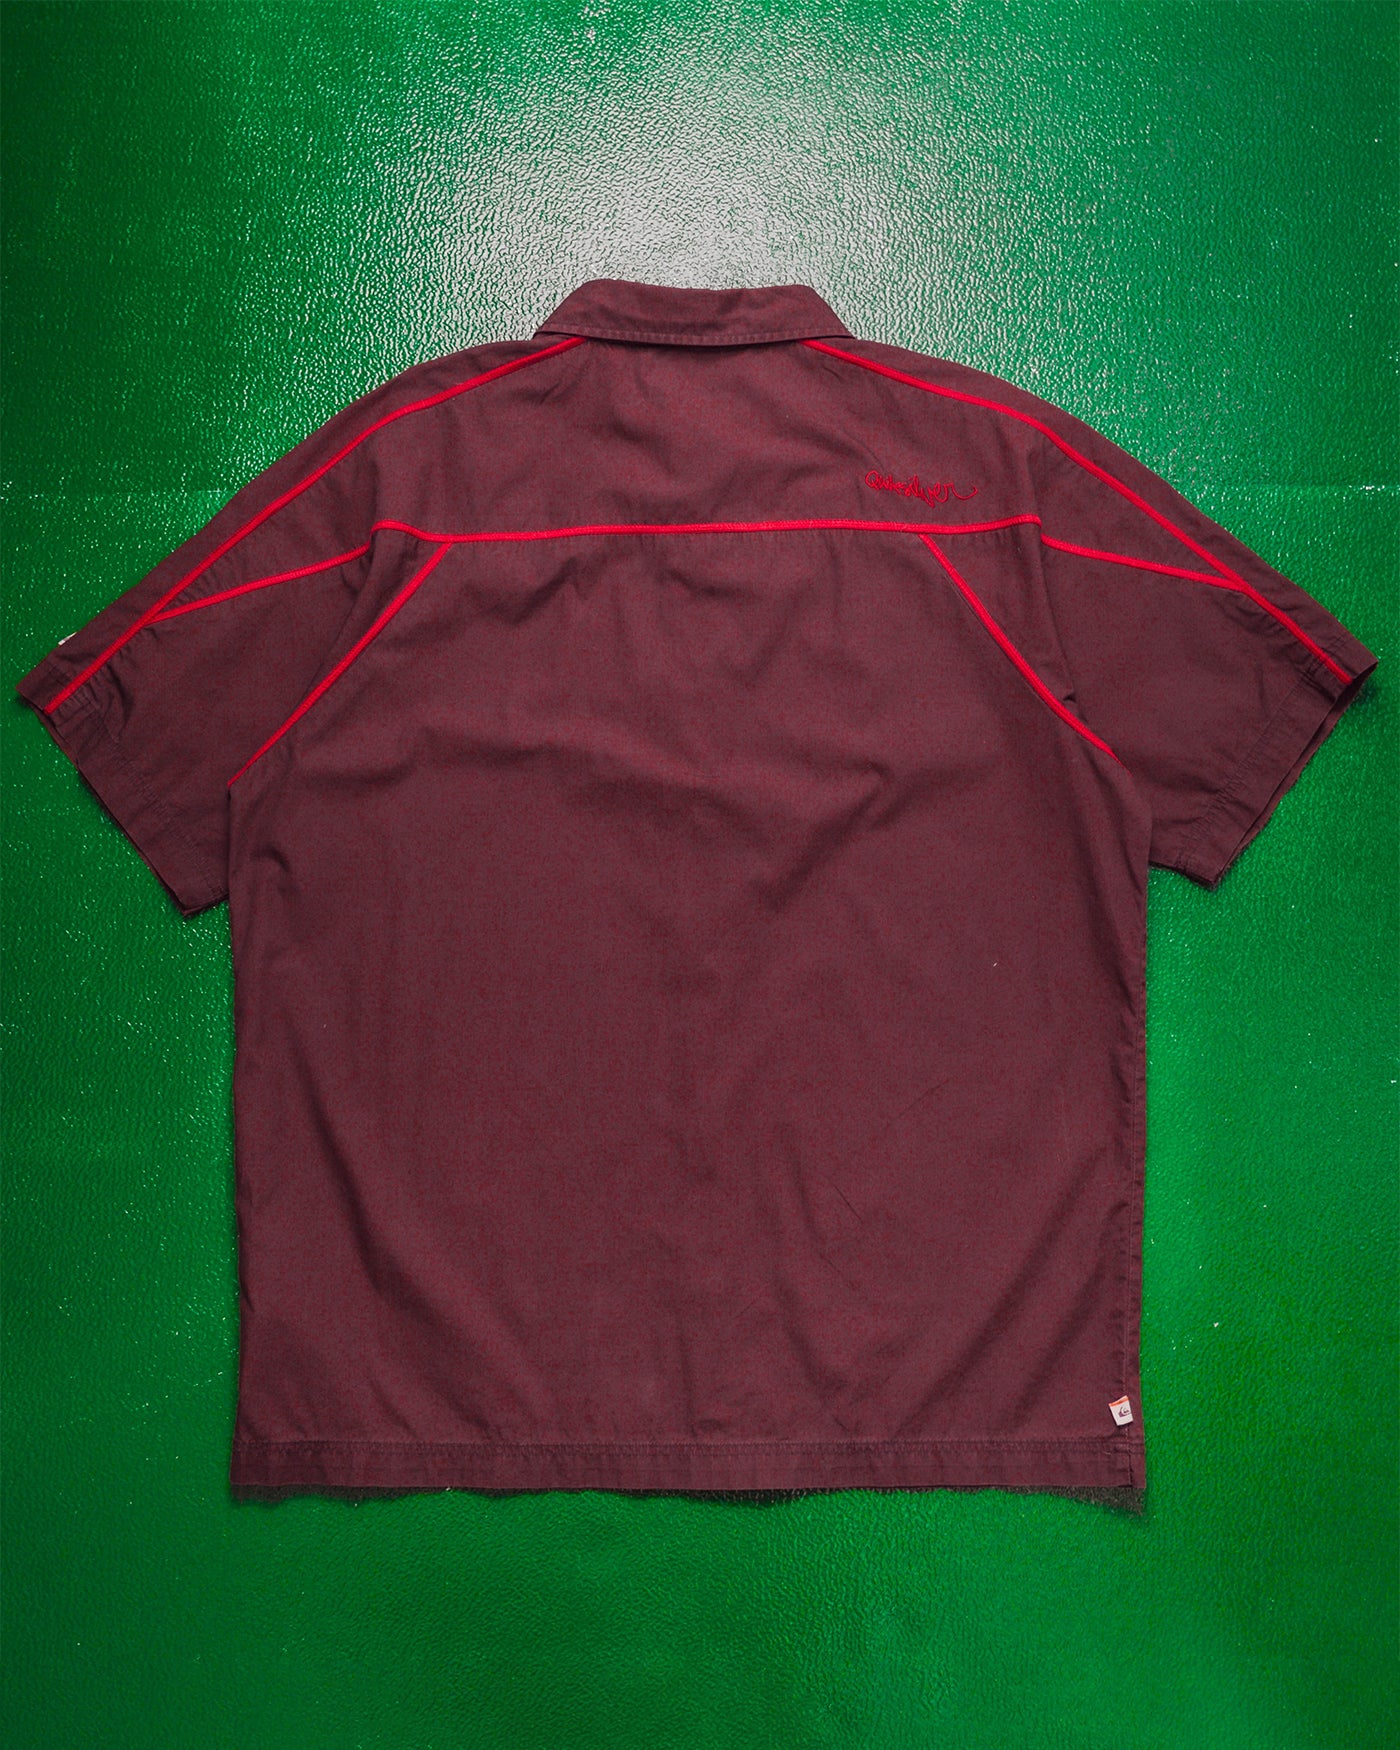 Panelled Contrast Overlocked Stitch Accent Burgundy Snap Button Shirt (L)